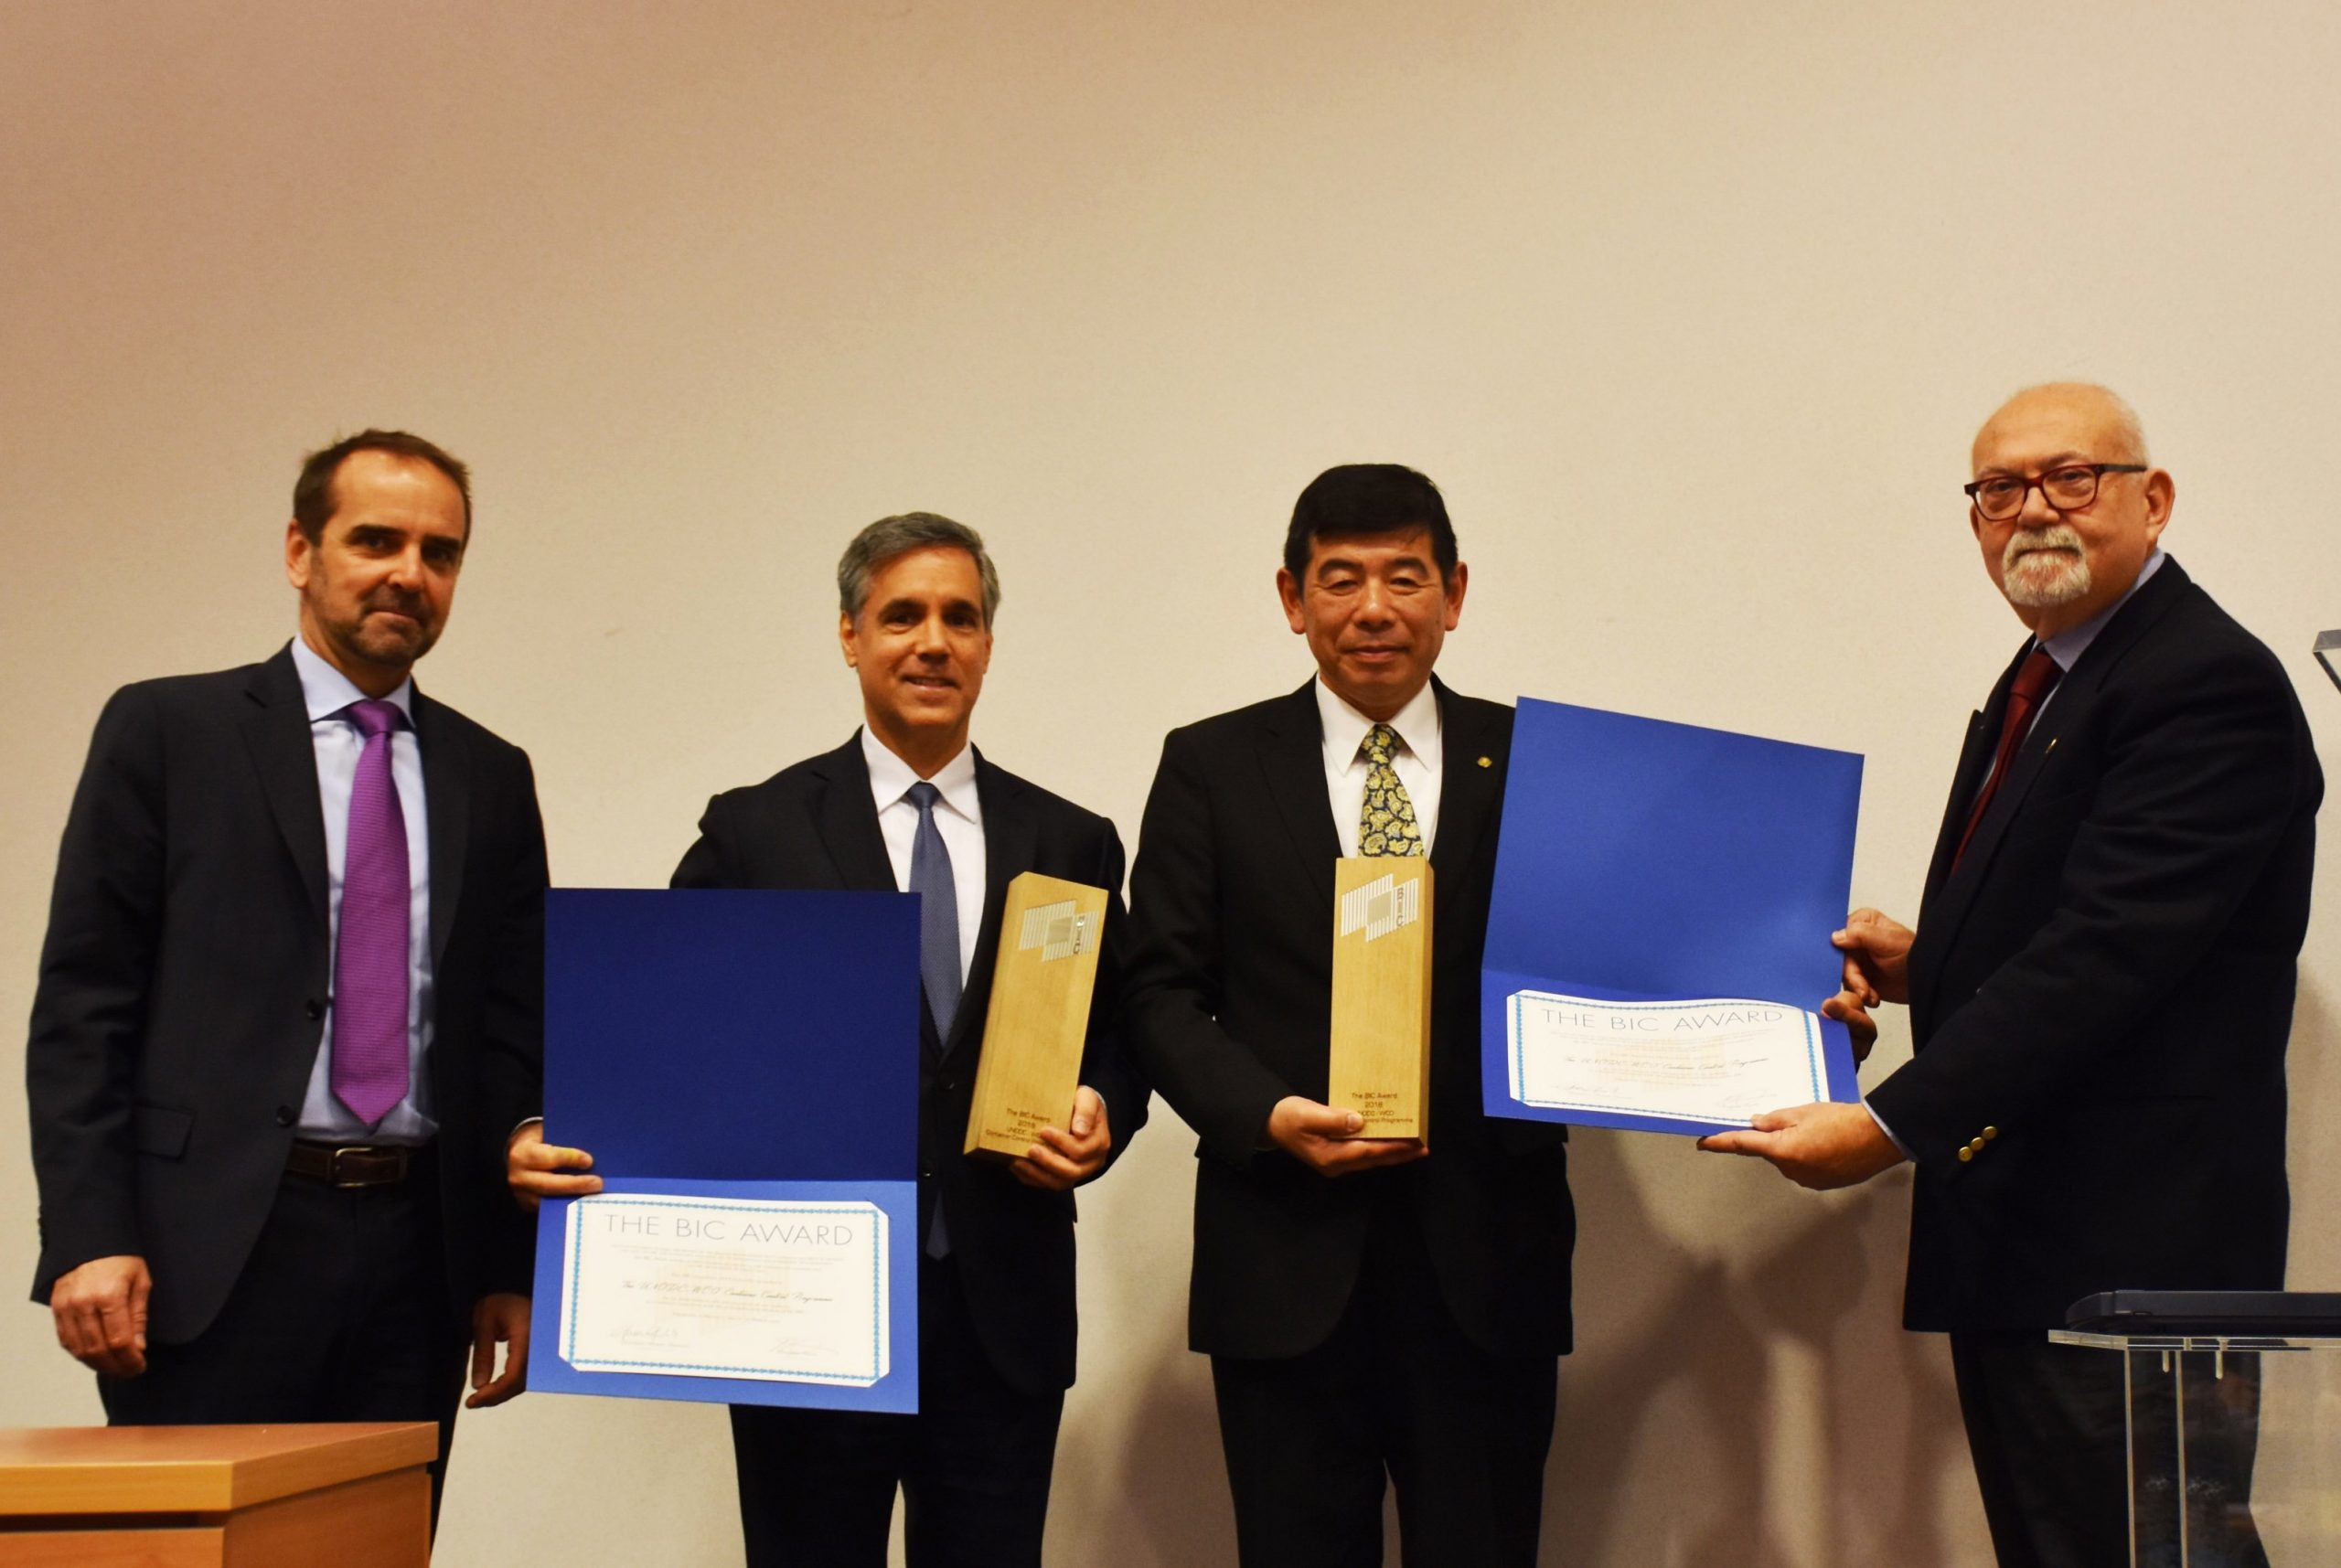 The Bureau International des Containers (BIC) is pleased to announce that the UNODC-WCO Container Control Programme (CCP) has won the 2018 BIC Award which was recently presented at the World Customs Organization headquarters in Brussels.